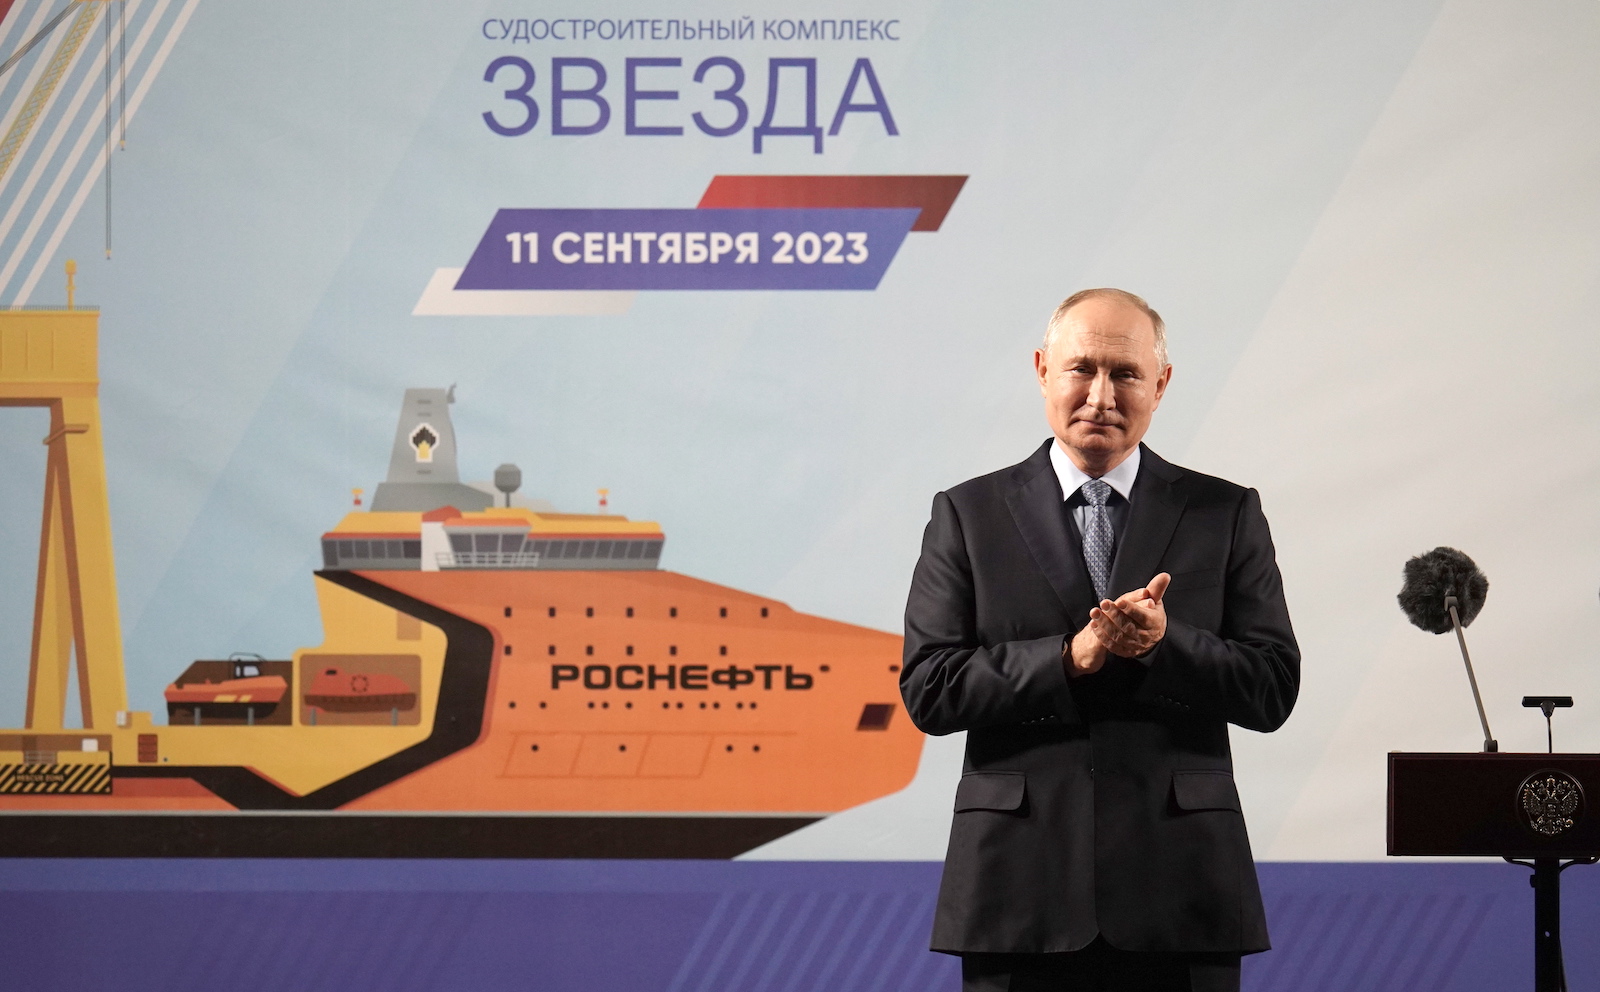 epa10854463 Russian President Vladimir Putin attends the naming ceremony of the Arctic tanker-gas carrier Alexey Kosygin and the tanker-shuttle Valentin Pikul at the Zvezda shipbuilding complex in Primorsky Krai region, Russia, 11 September 2023. Vladimir Putin is on a visit to the Far East, where he will take part in the EEF 2023 in Vladivostok on September 11 and 12.  EPA/ALEXEI DANICHEV /SPUTNIK/KREMLIN / POOL MANDATORY CREDIT